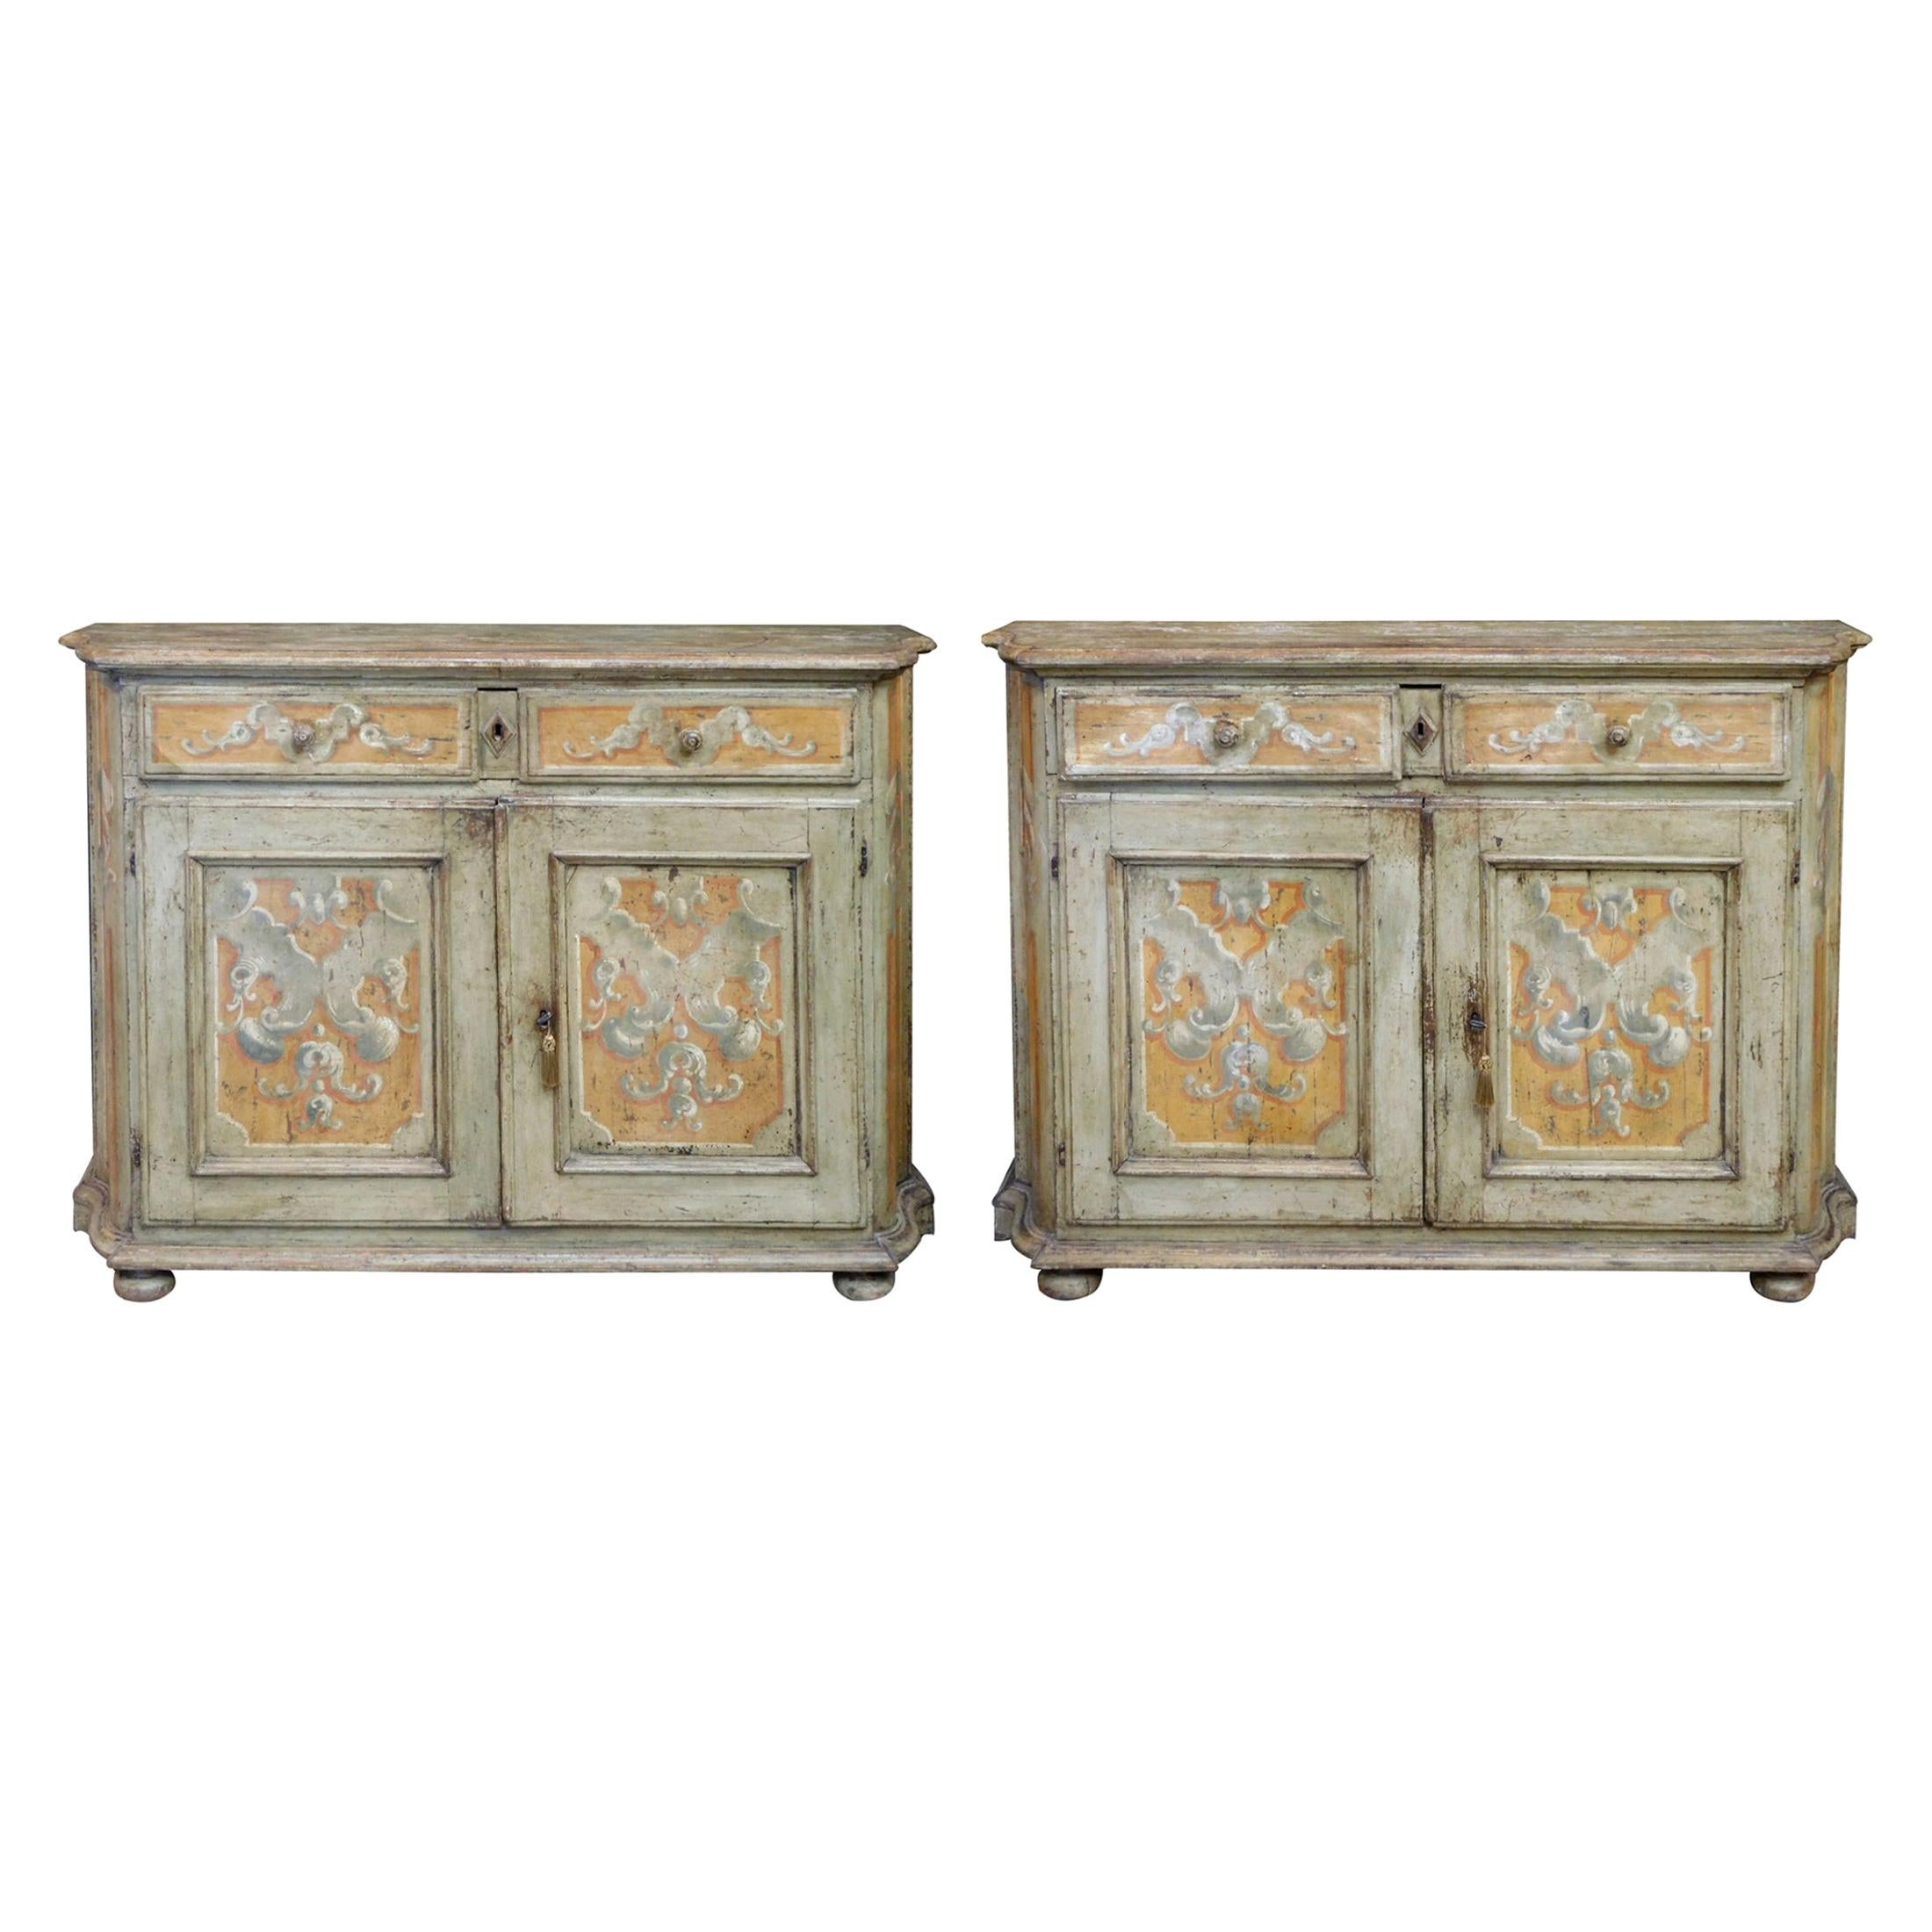 Pair of Italian Baroque Polychrome Painted Credenzas